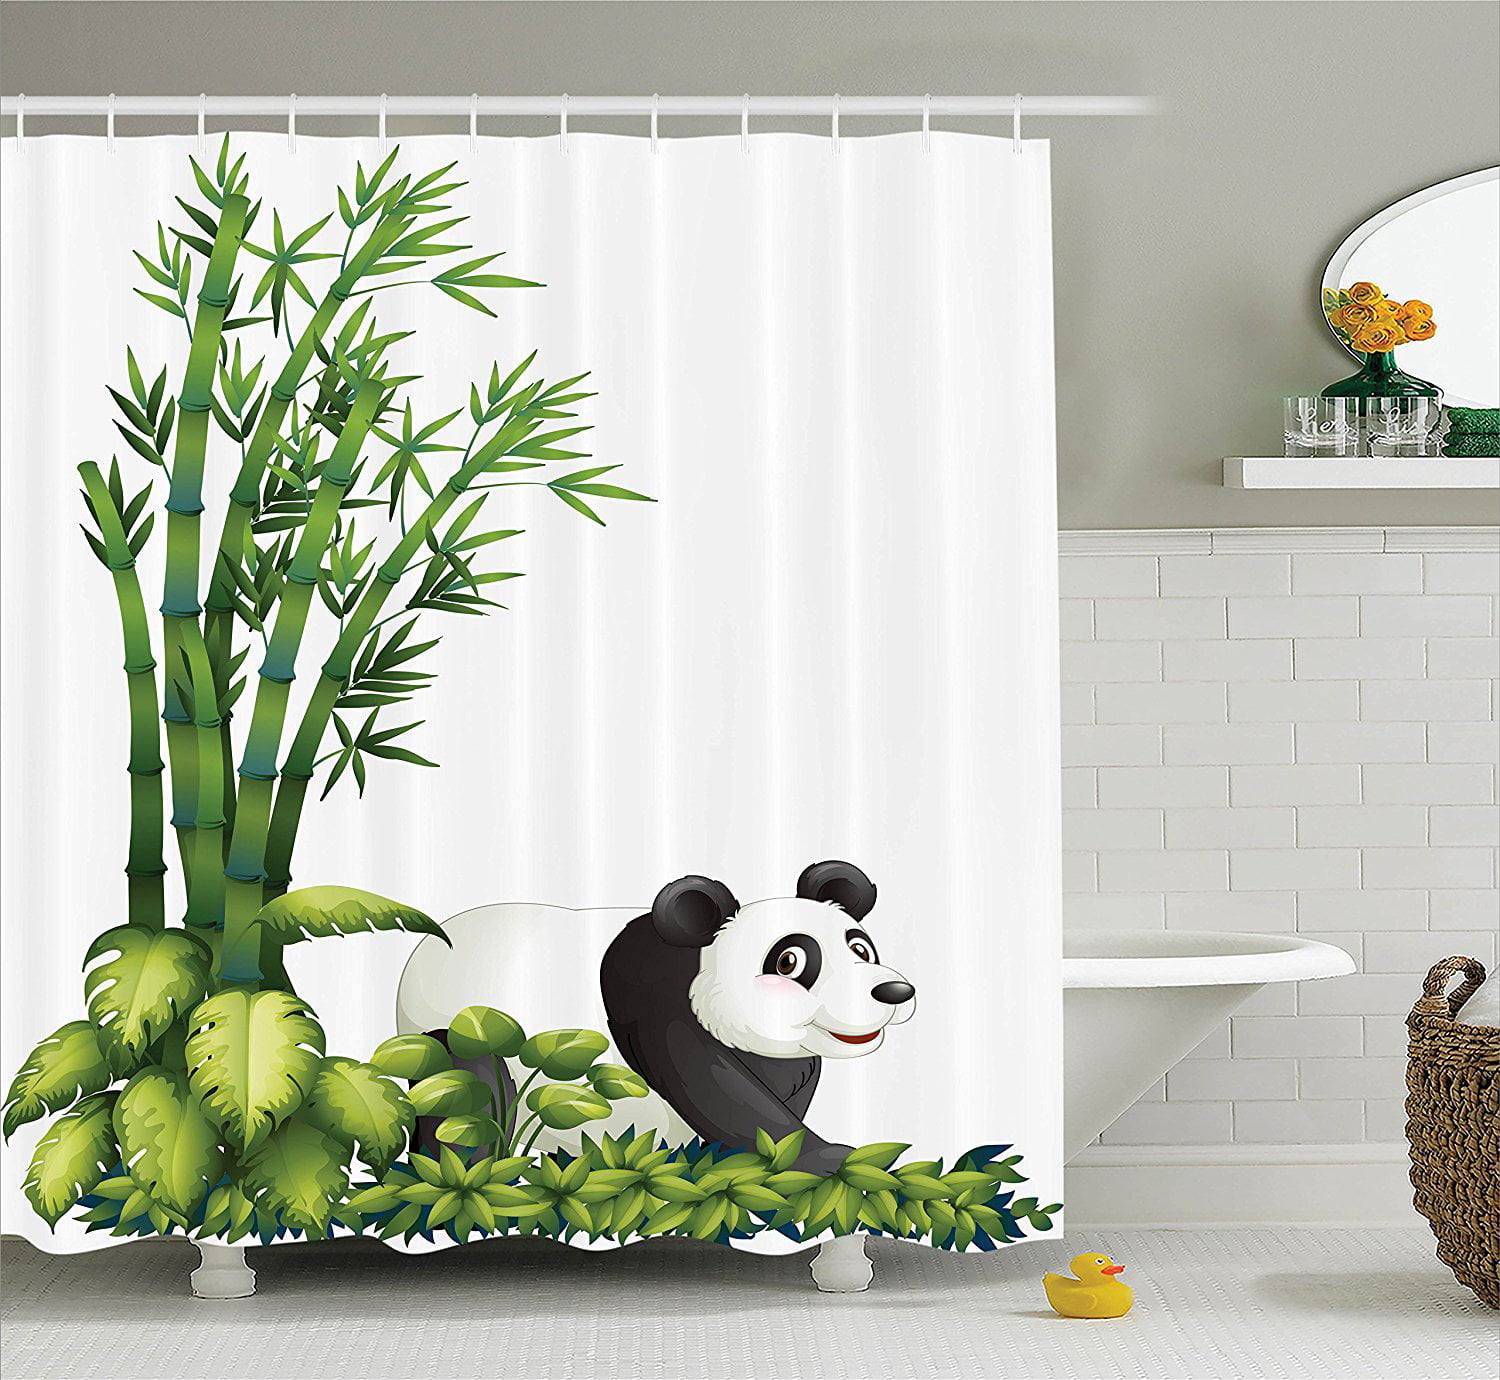 Details about   Panda and butterfly Shower Curtain Bathroom Decor Fabric & 12hooks 71" 